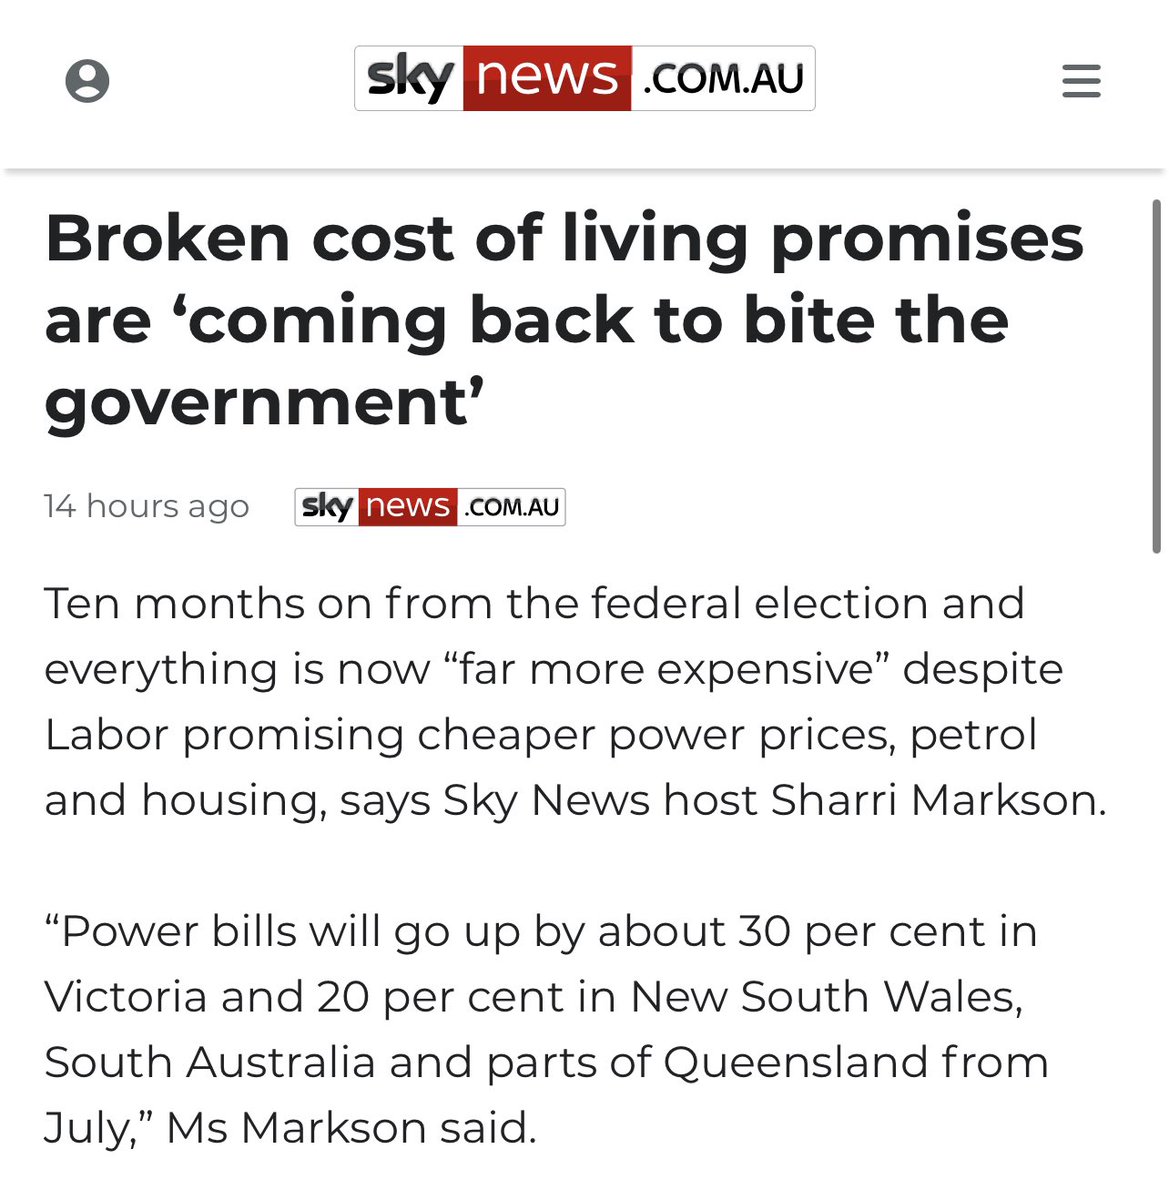 During the election we were promised a $275 cut in power bills. B...